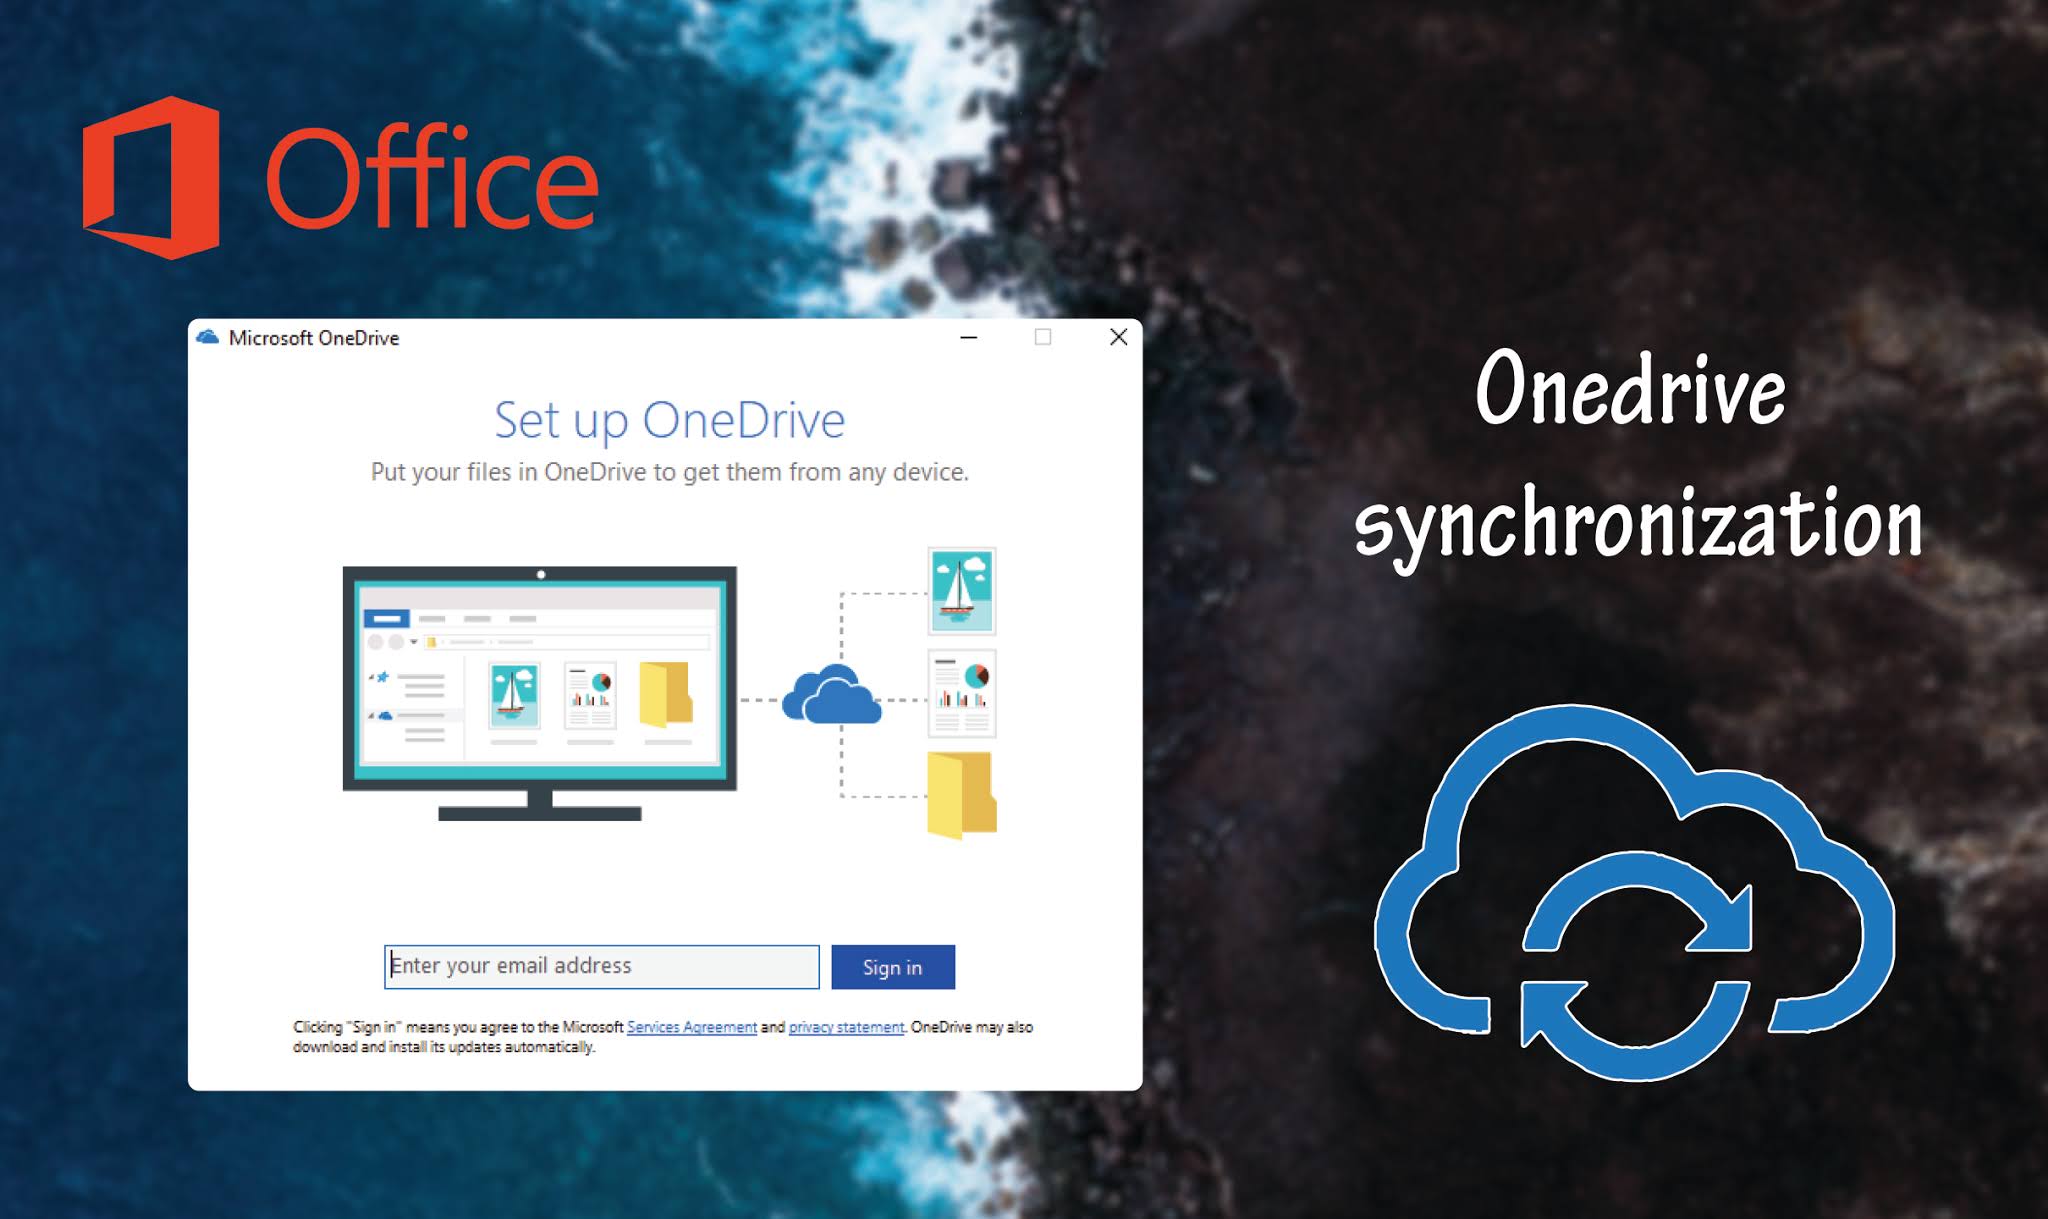 Recover your data with Onedrive